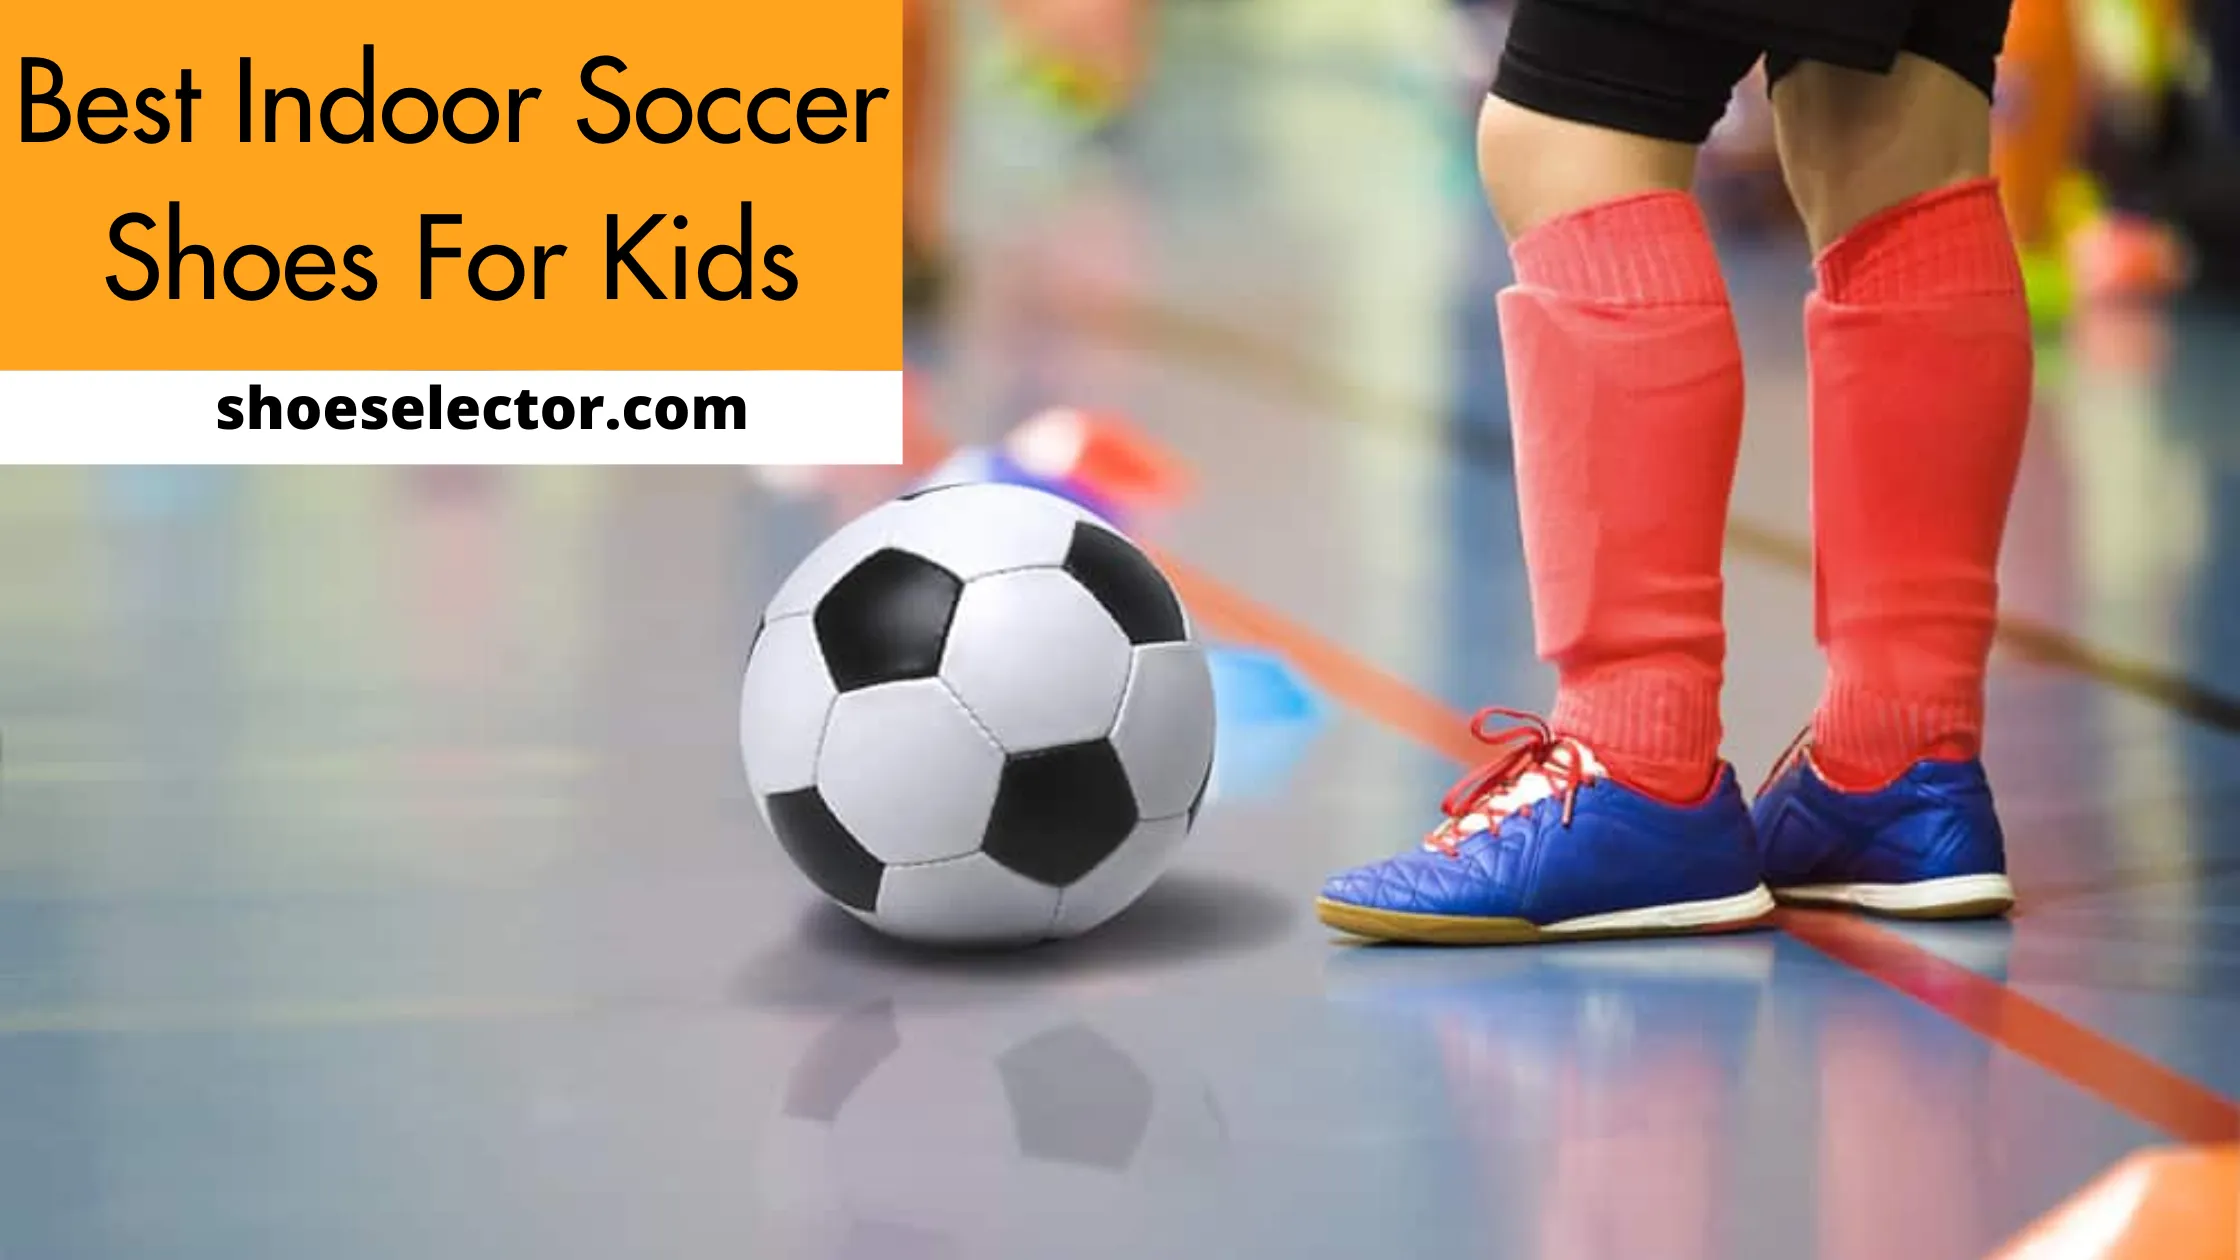 Best Indoor Soccer Shoes For Kids With Shopping Tips